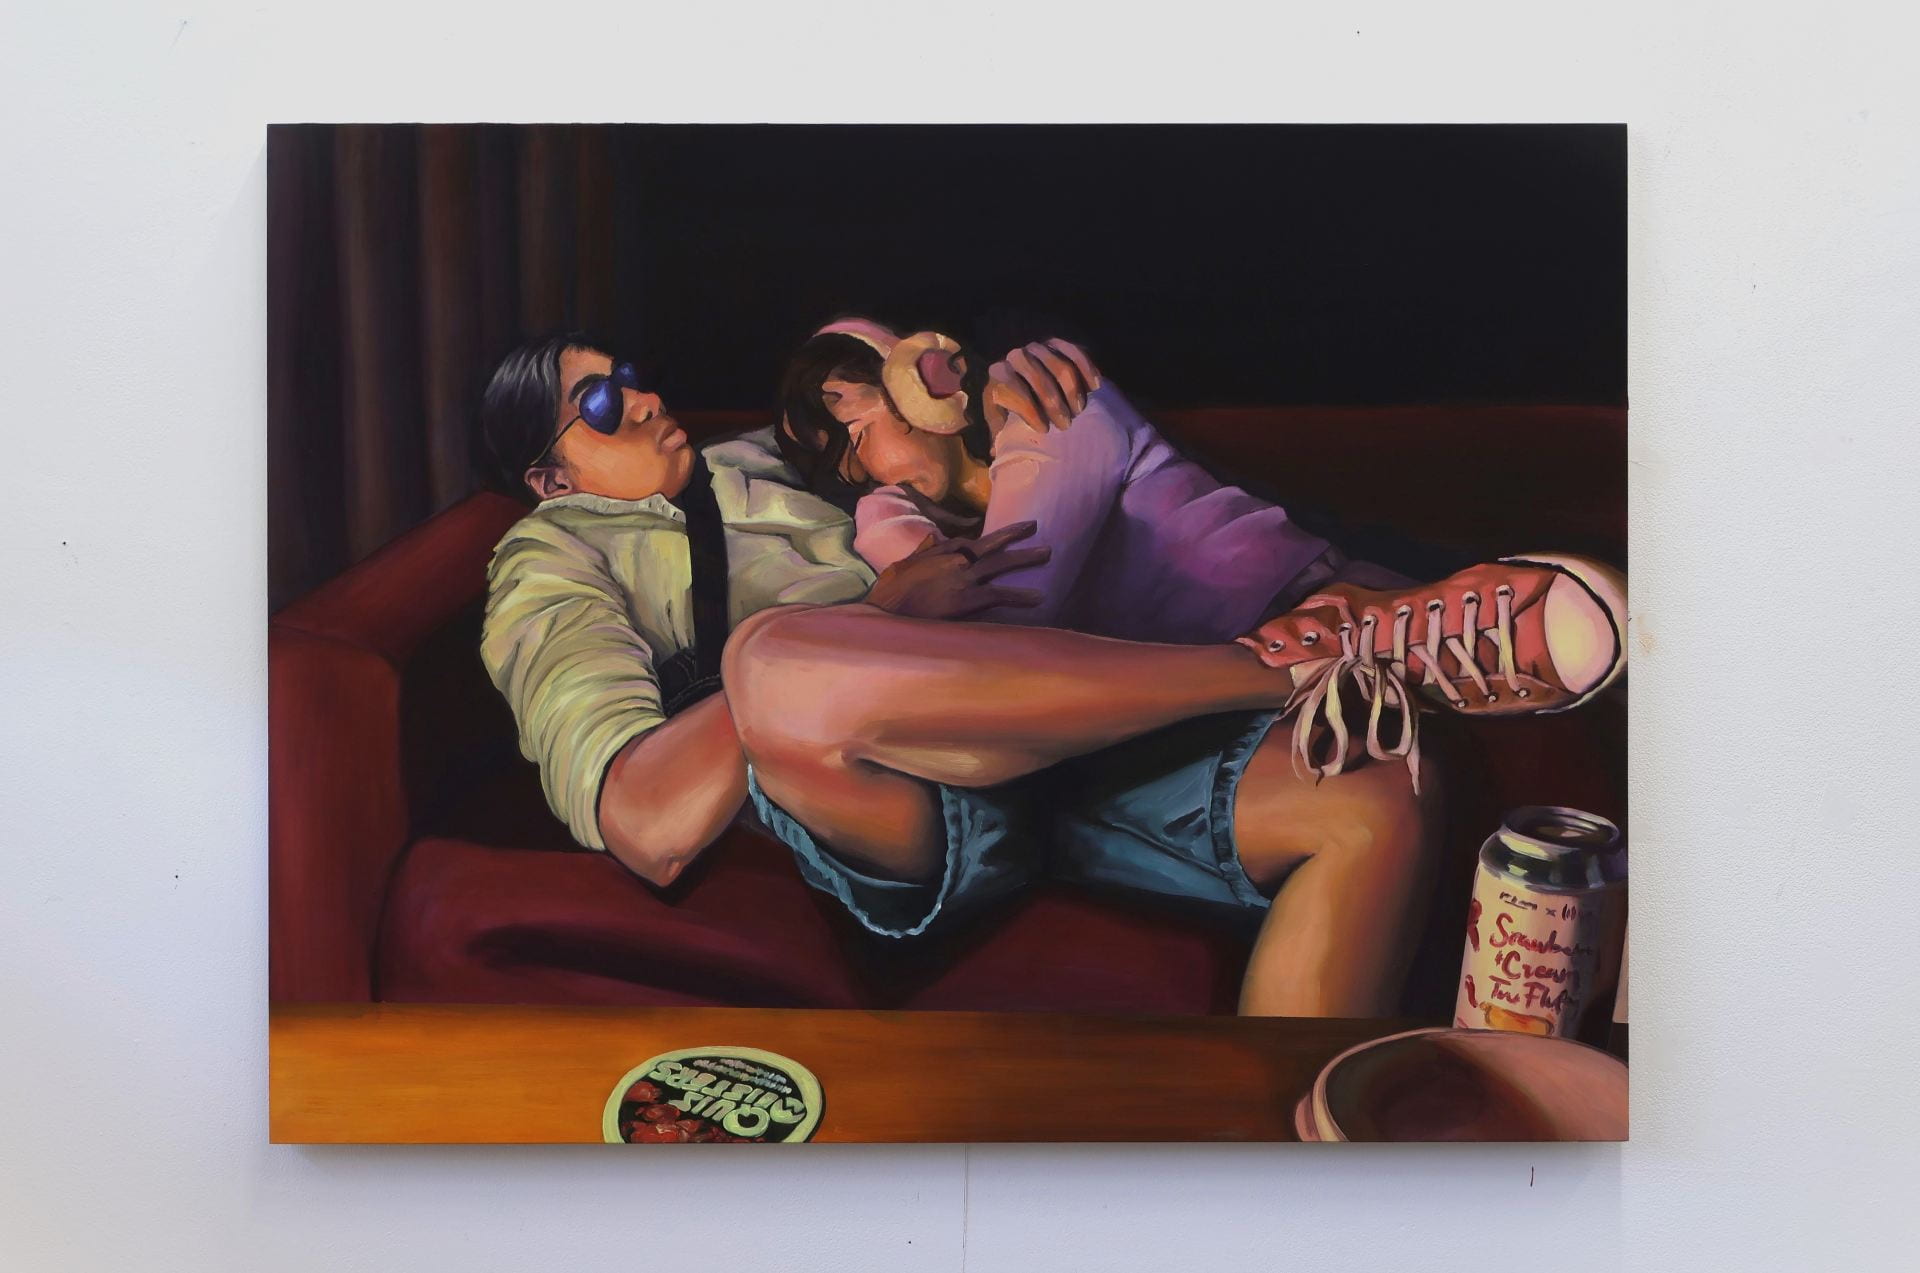 A painting of two people sleeping on a couch in a pub